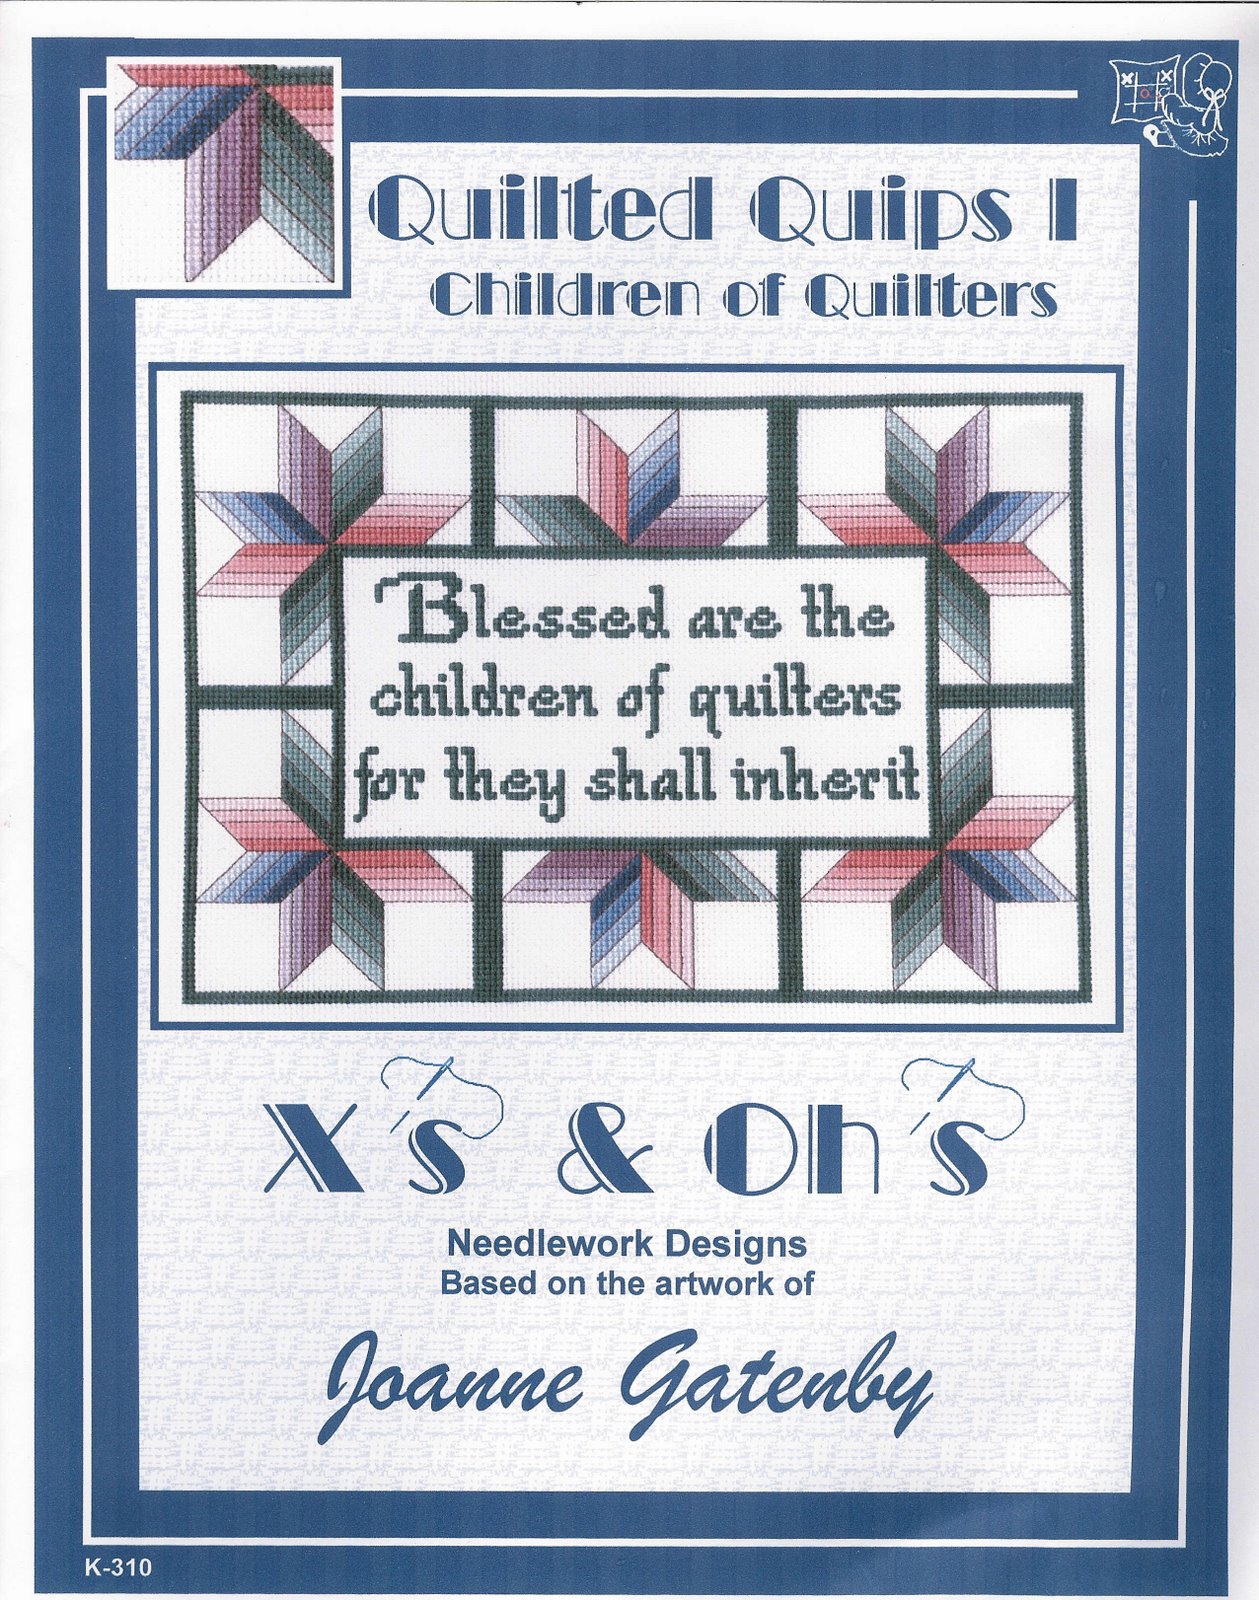 [Quilters+cover.jpg]